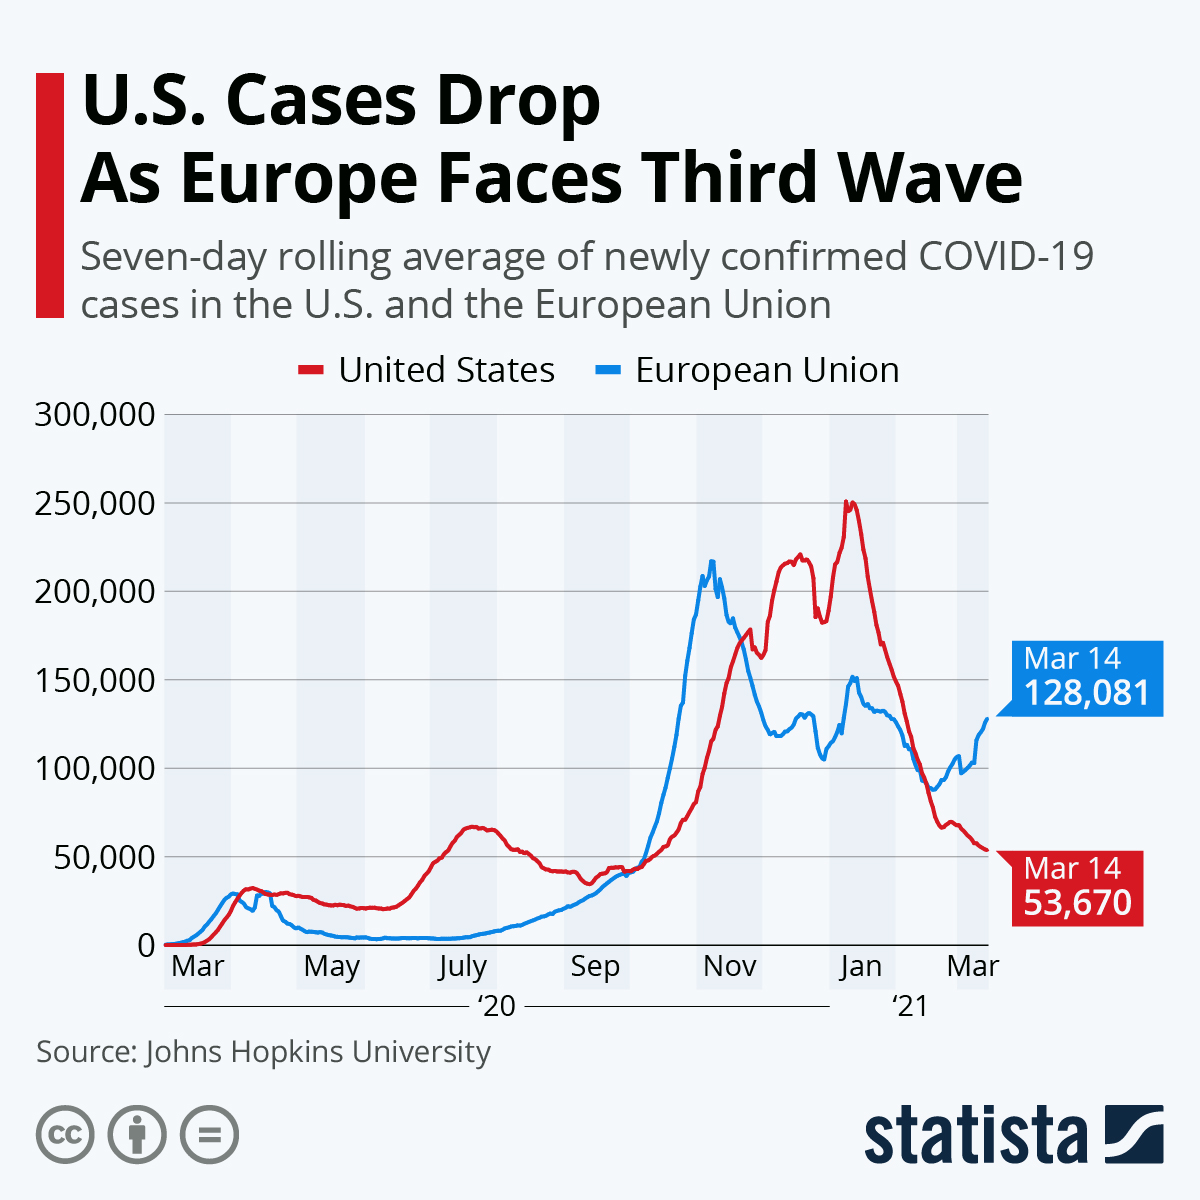 U.S. Cases Drop As Europe Faces Third Wave